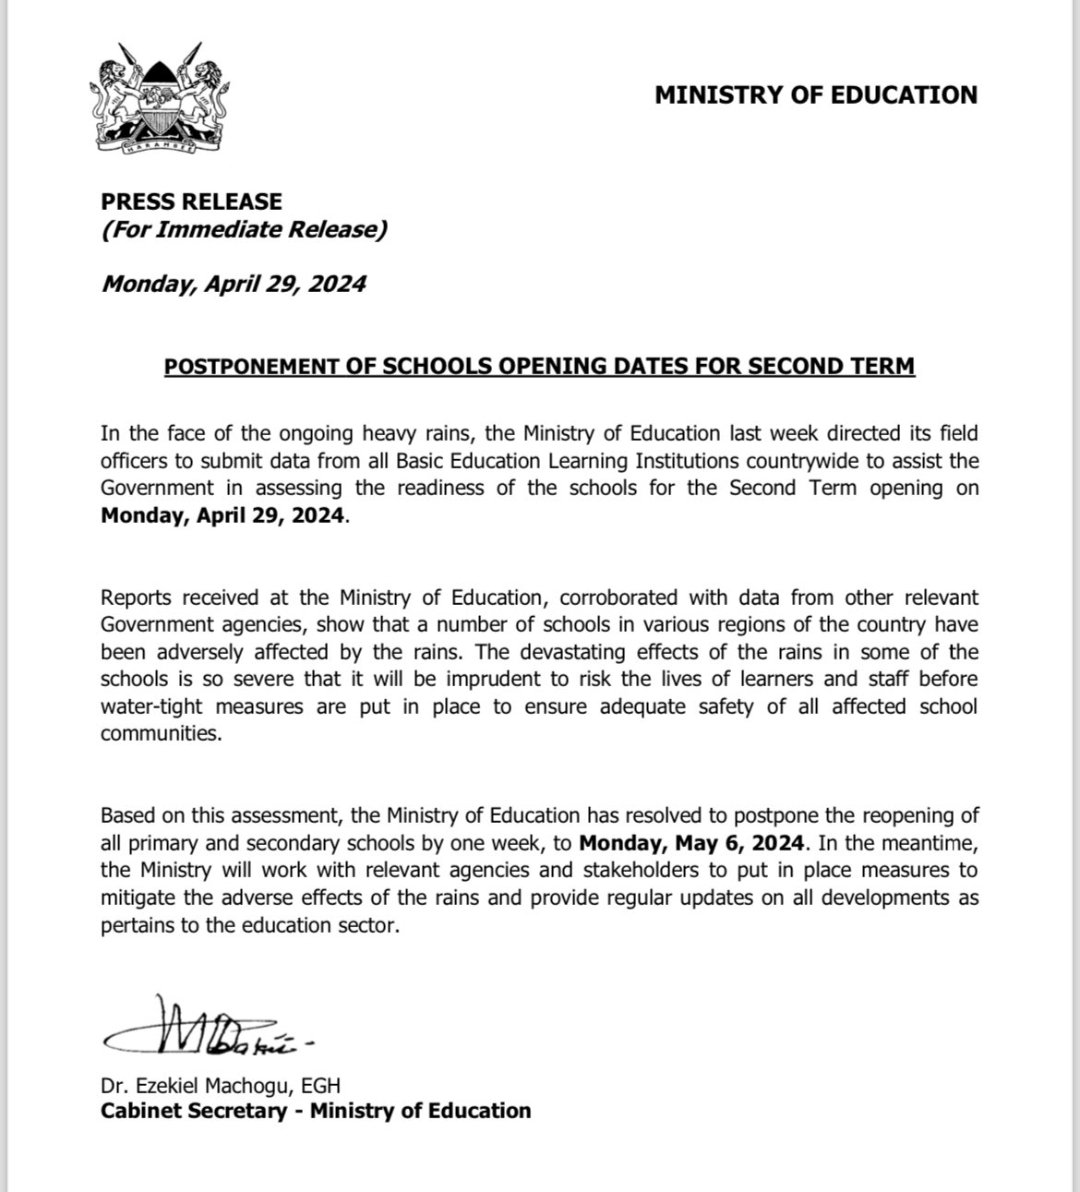 Schools delay re-opening for second term from April 30 to May 6 over #flooding disaster ~ @EduMinKenya CS @machoguezekiel #EducationKE